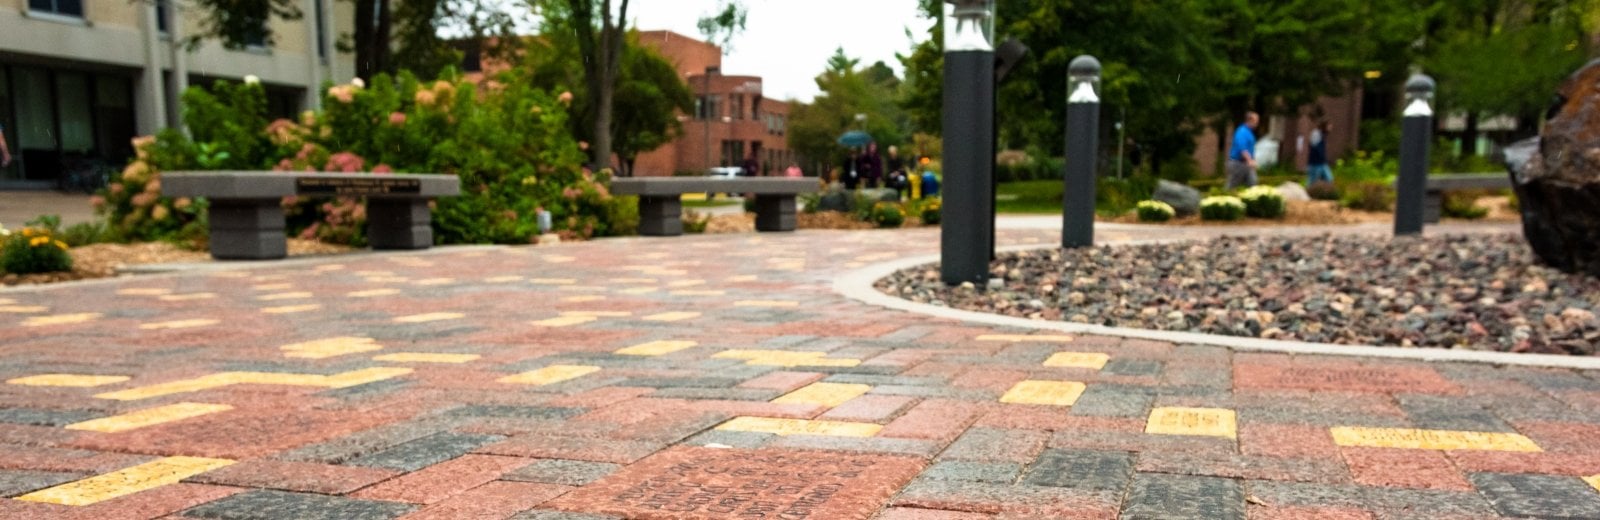 A view of the bricks and benches around the husky statue.